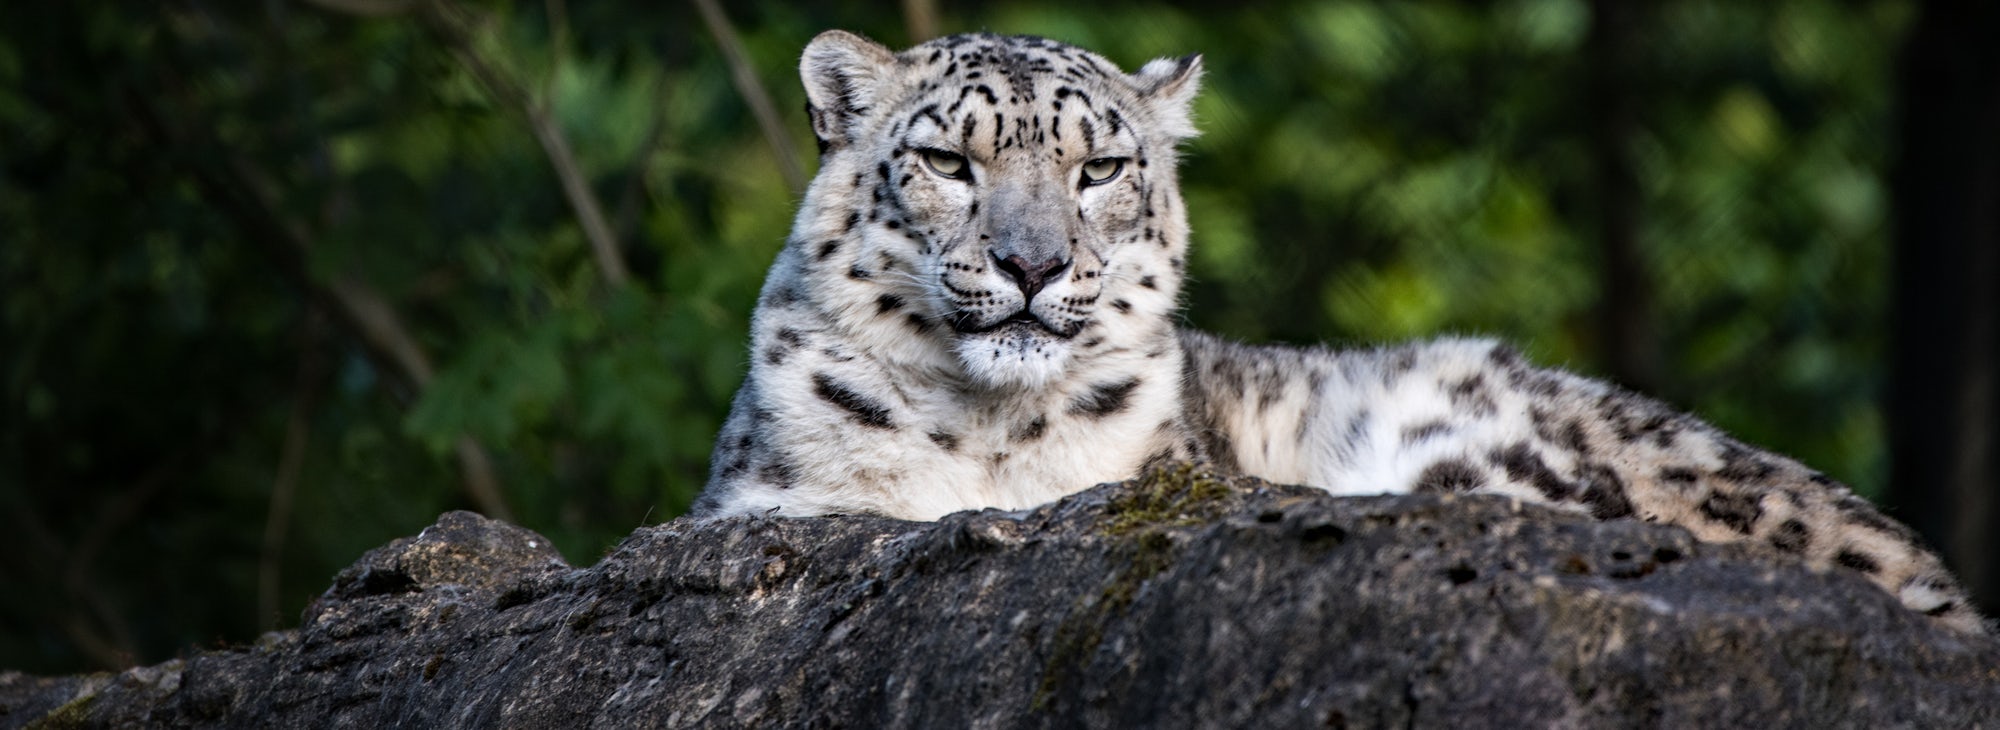 Female Snow Leopard in Marwell Zoo, Hampshire, UK